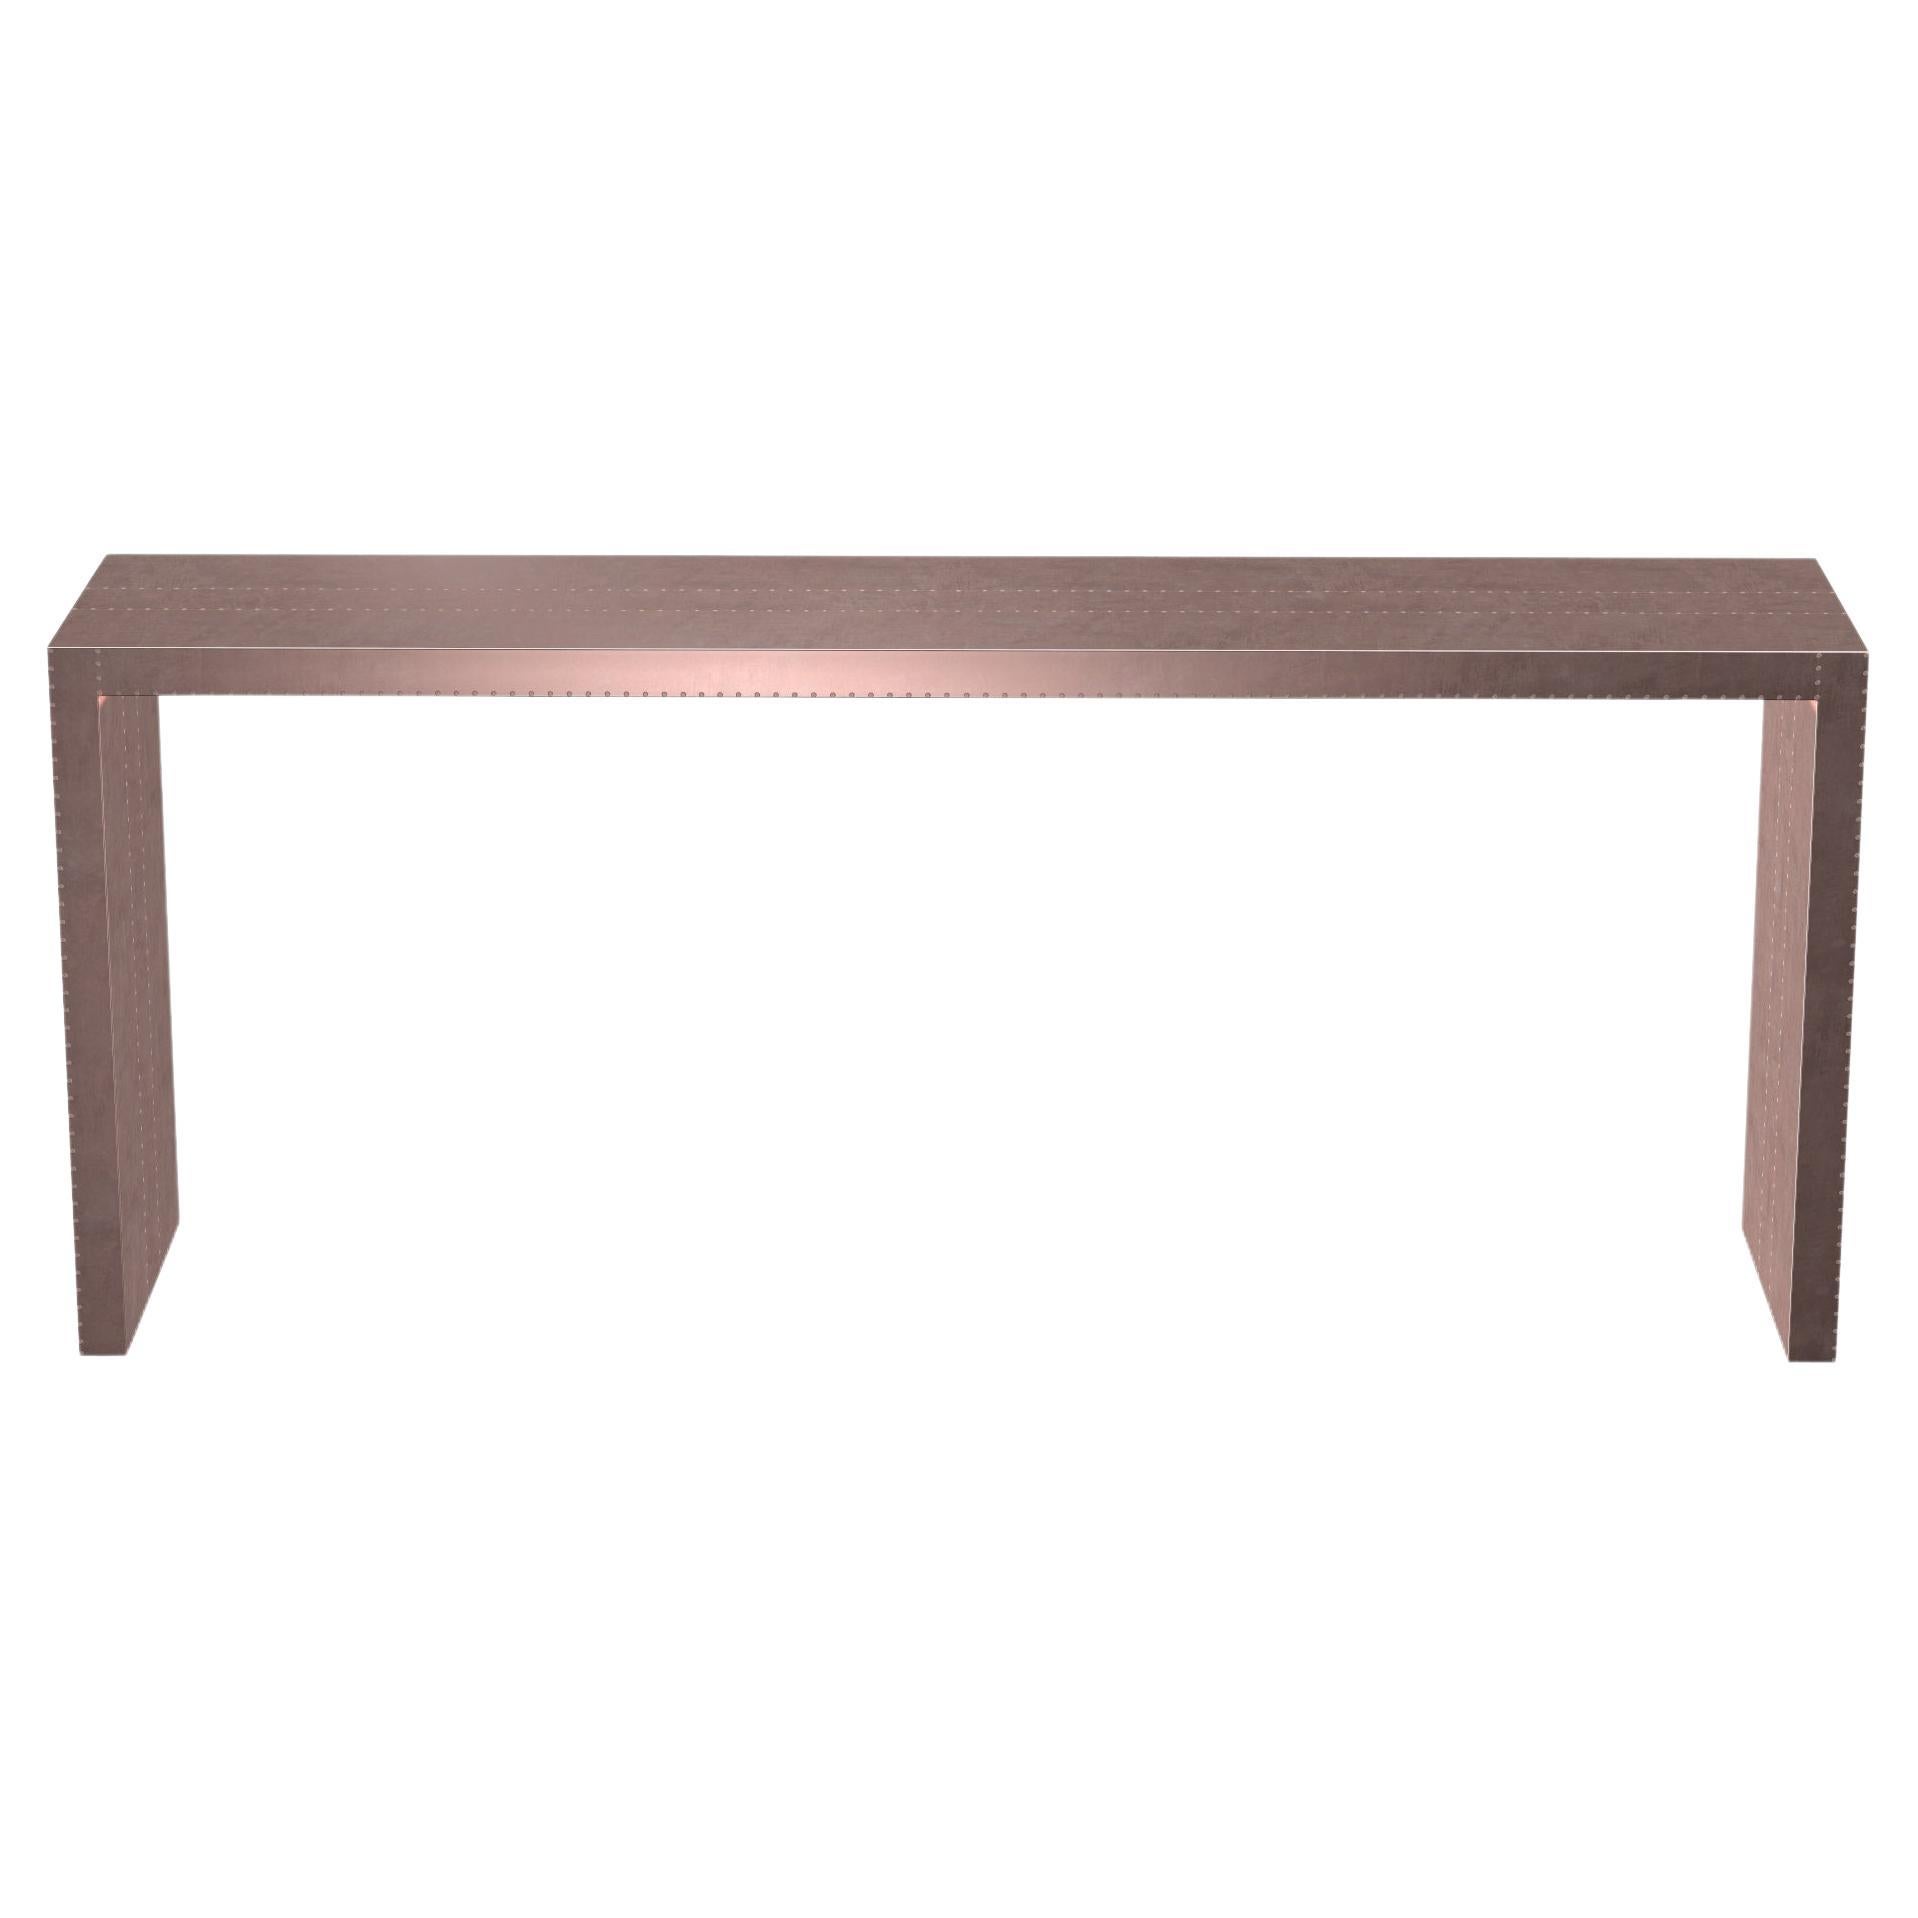 Art Deco Conference Tables Rectangular Console in Smooth Copper by Alison Spear For Sale